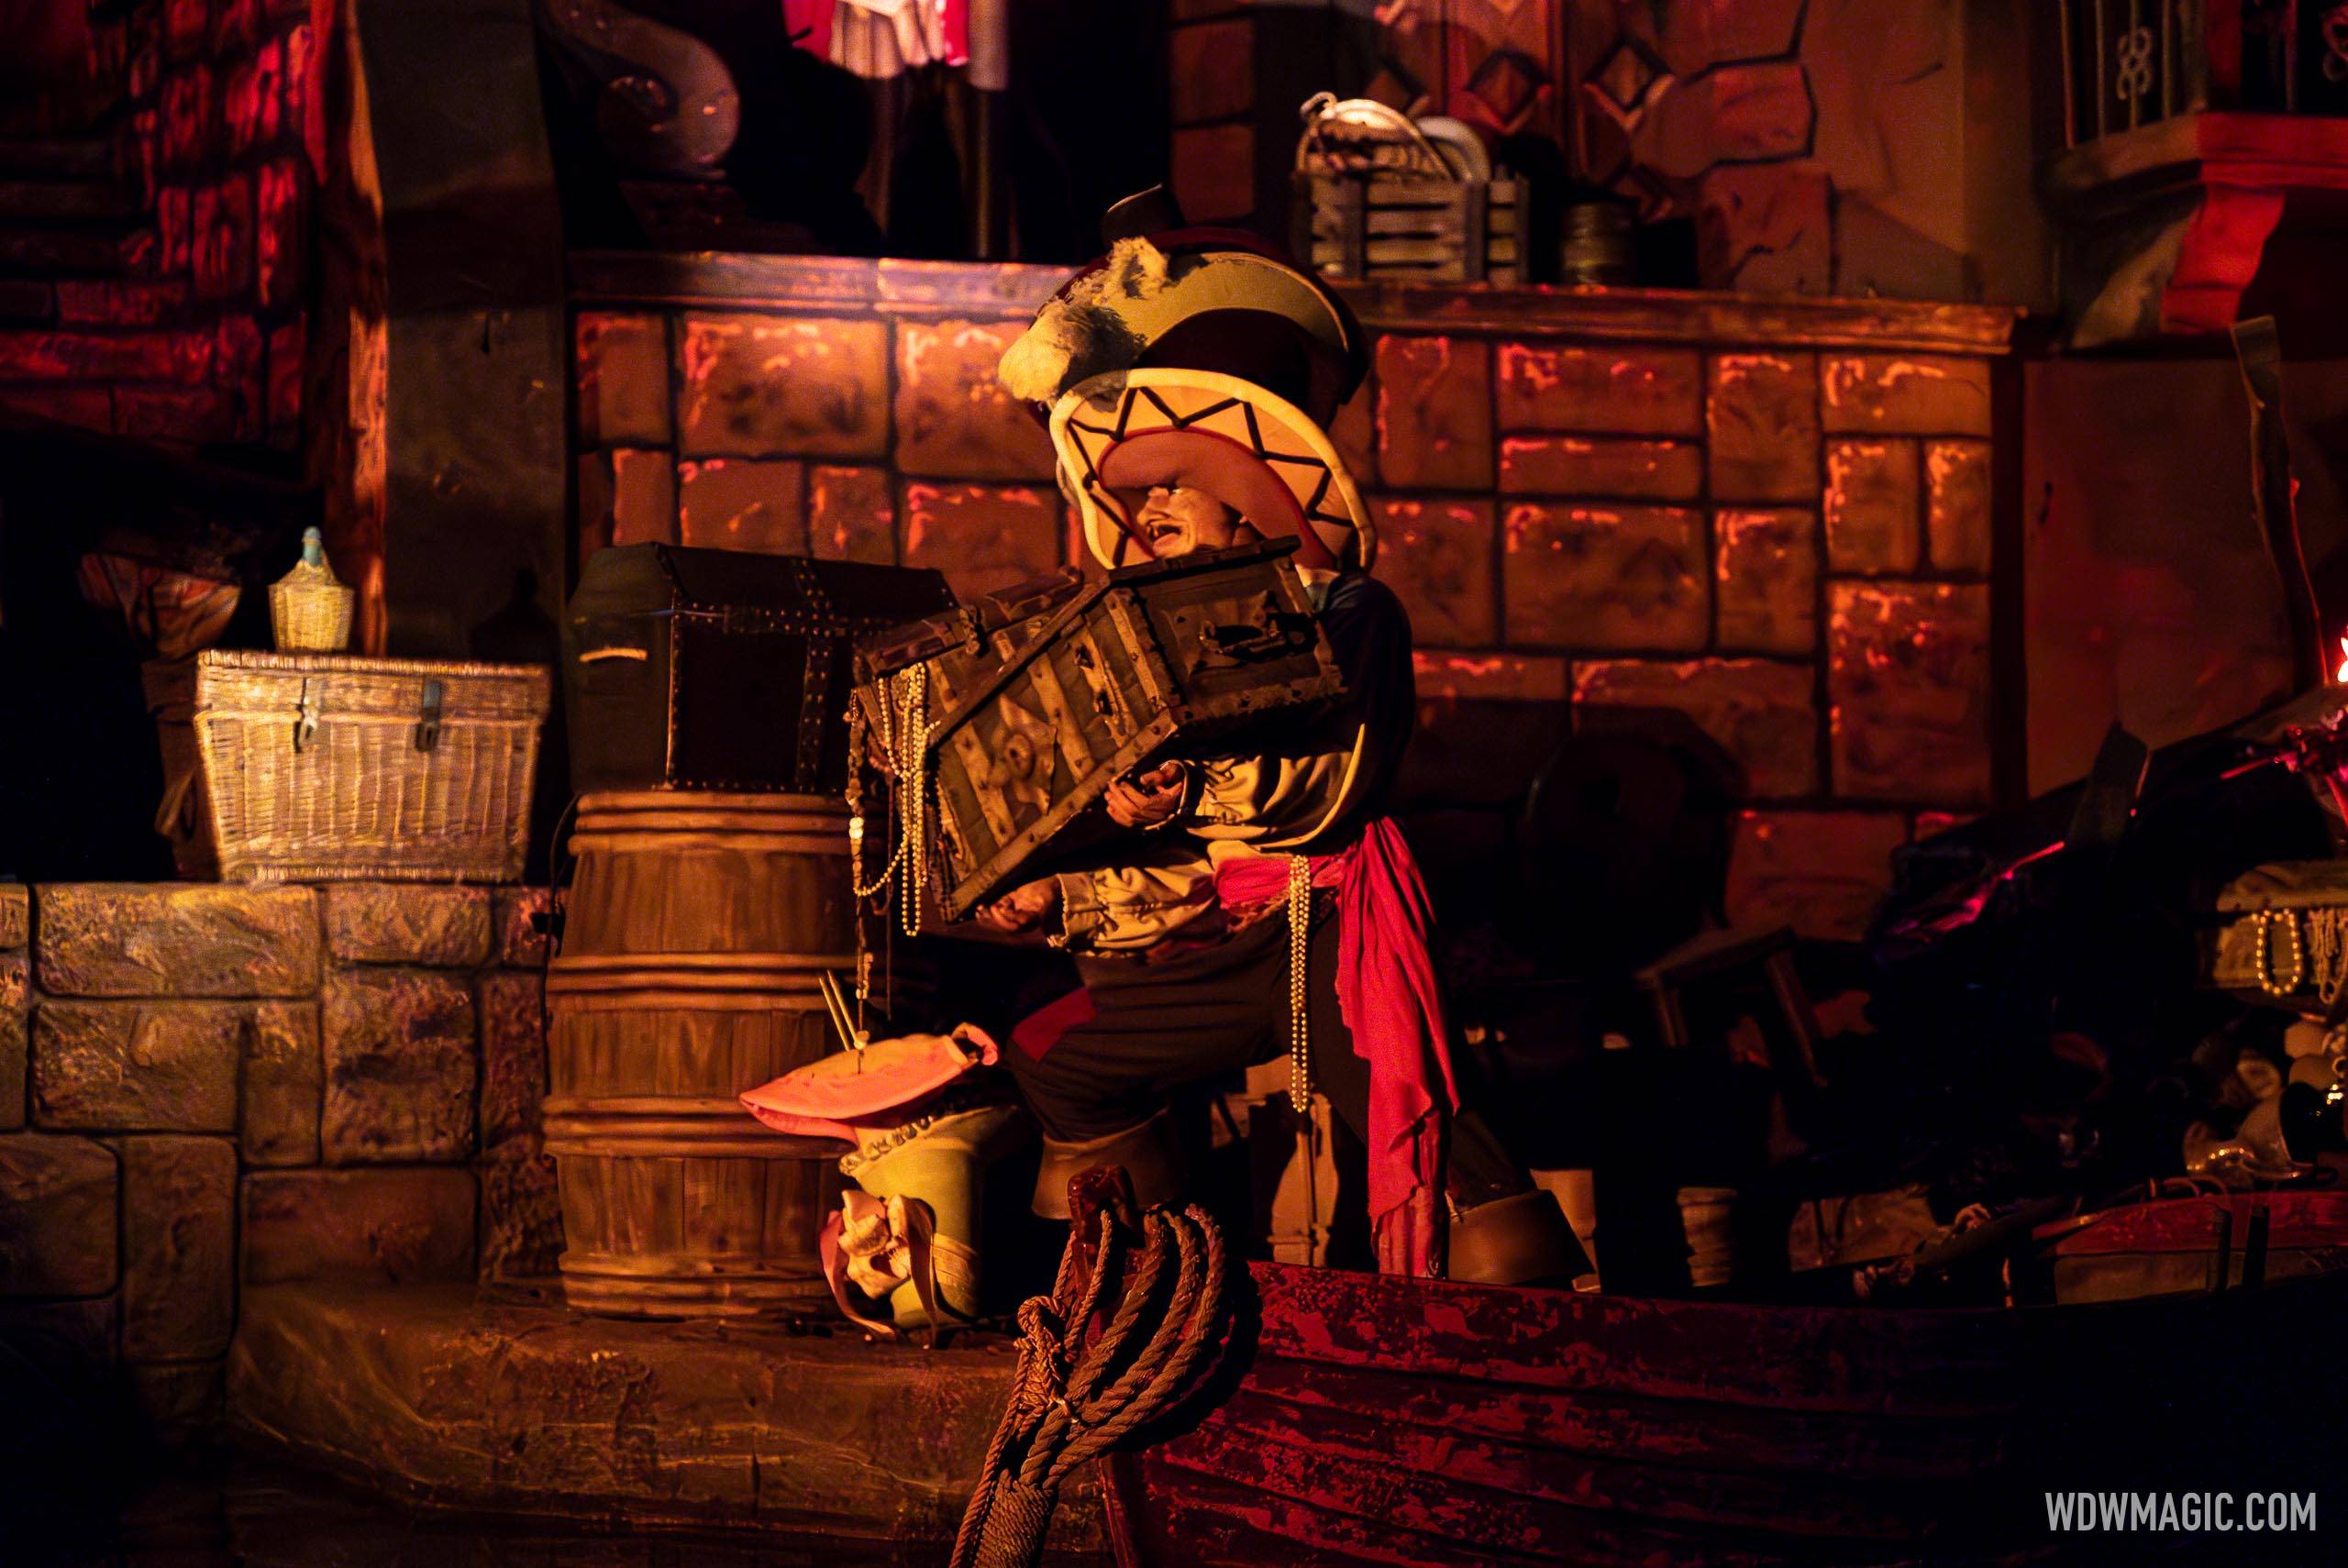 Captain Jack Sparrow's Pirate Tutorial closing at the end of the month